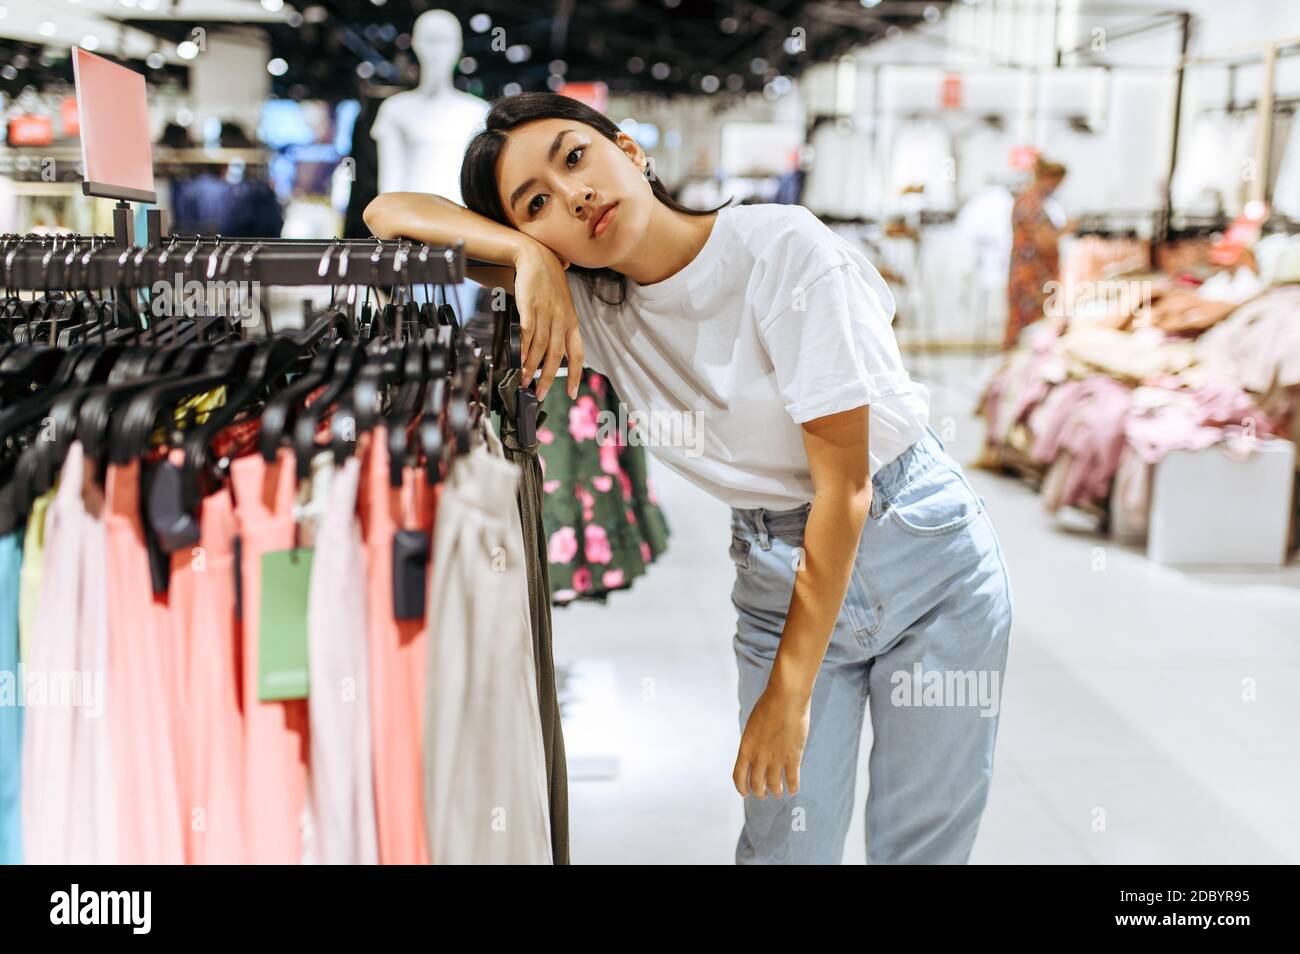 Woman shopping clothes. Female shopper looking at fashionable clothes  indoors in clothing store. Stock Photo